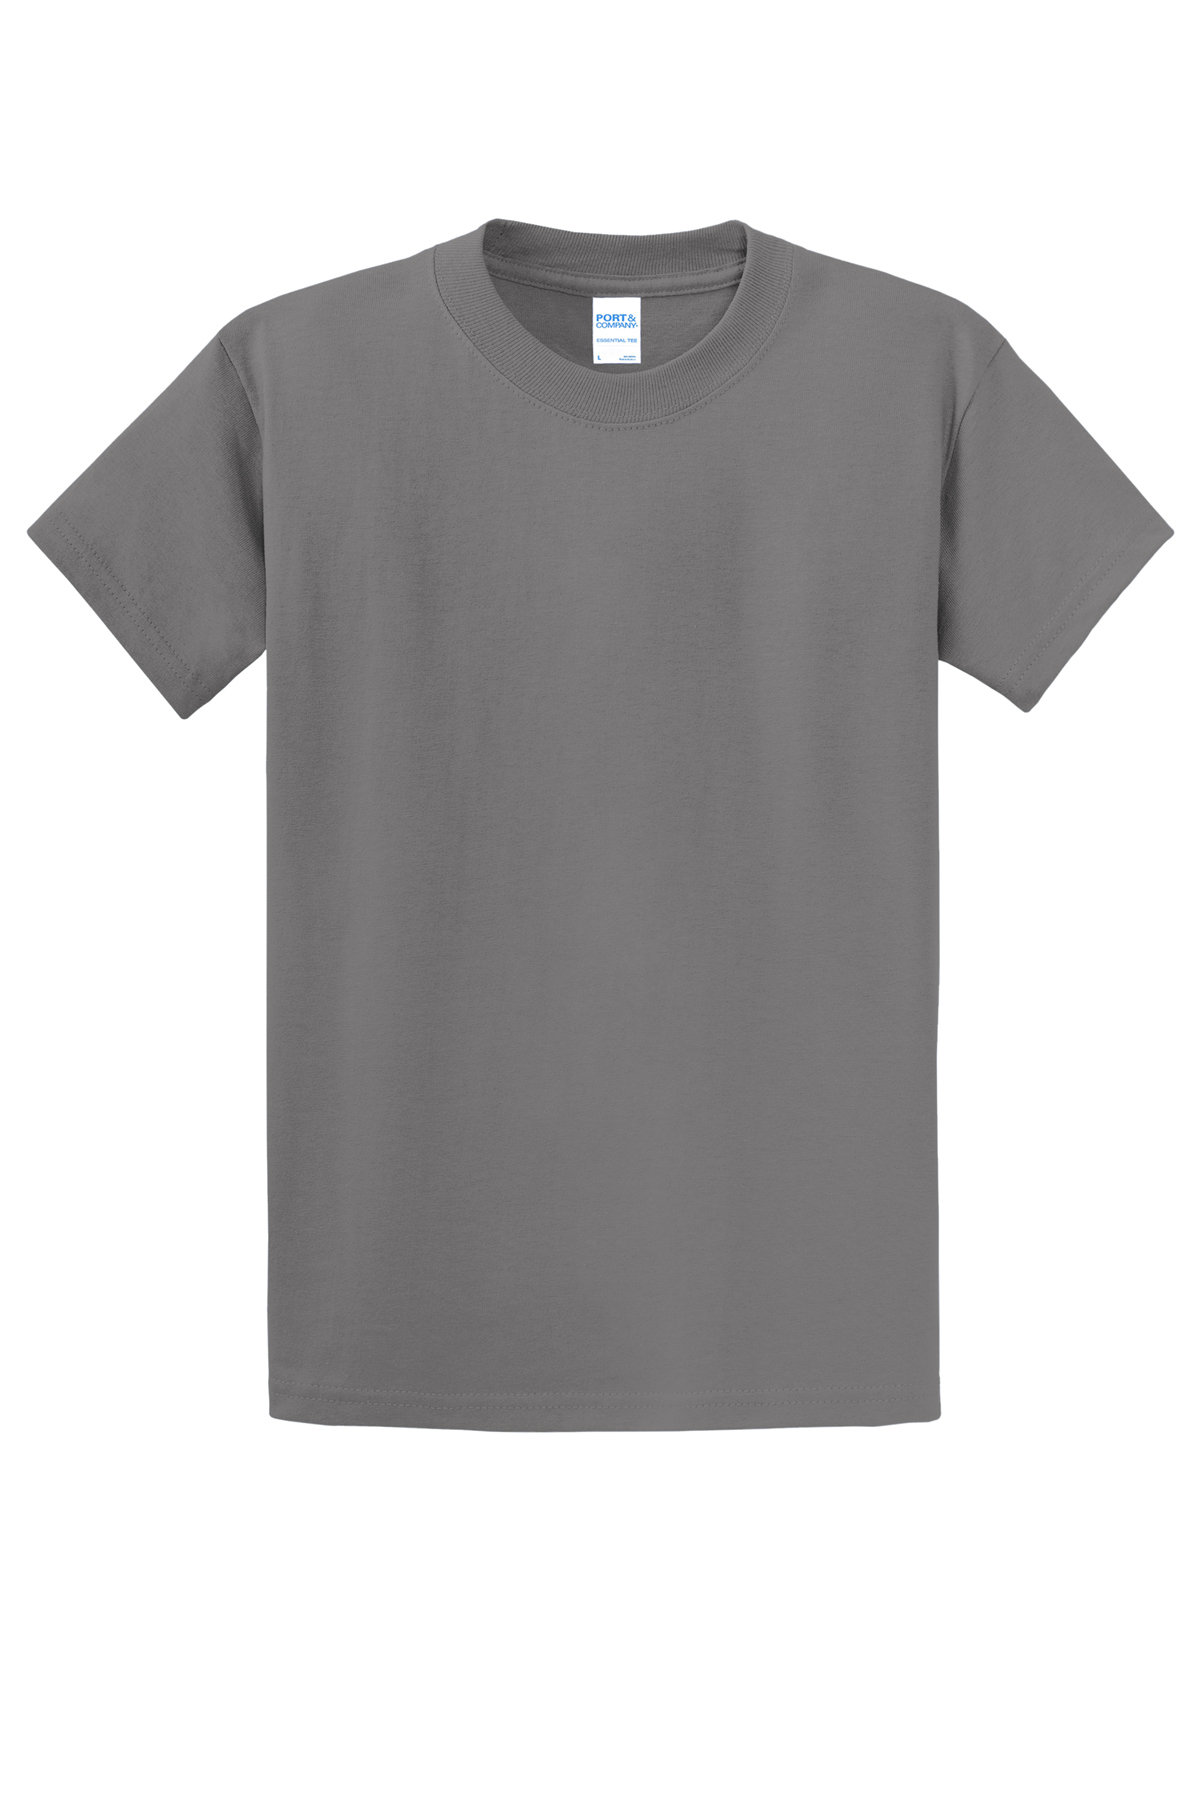 Port & Company Tall Essential Tee | Product | Port & Company